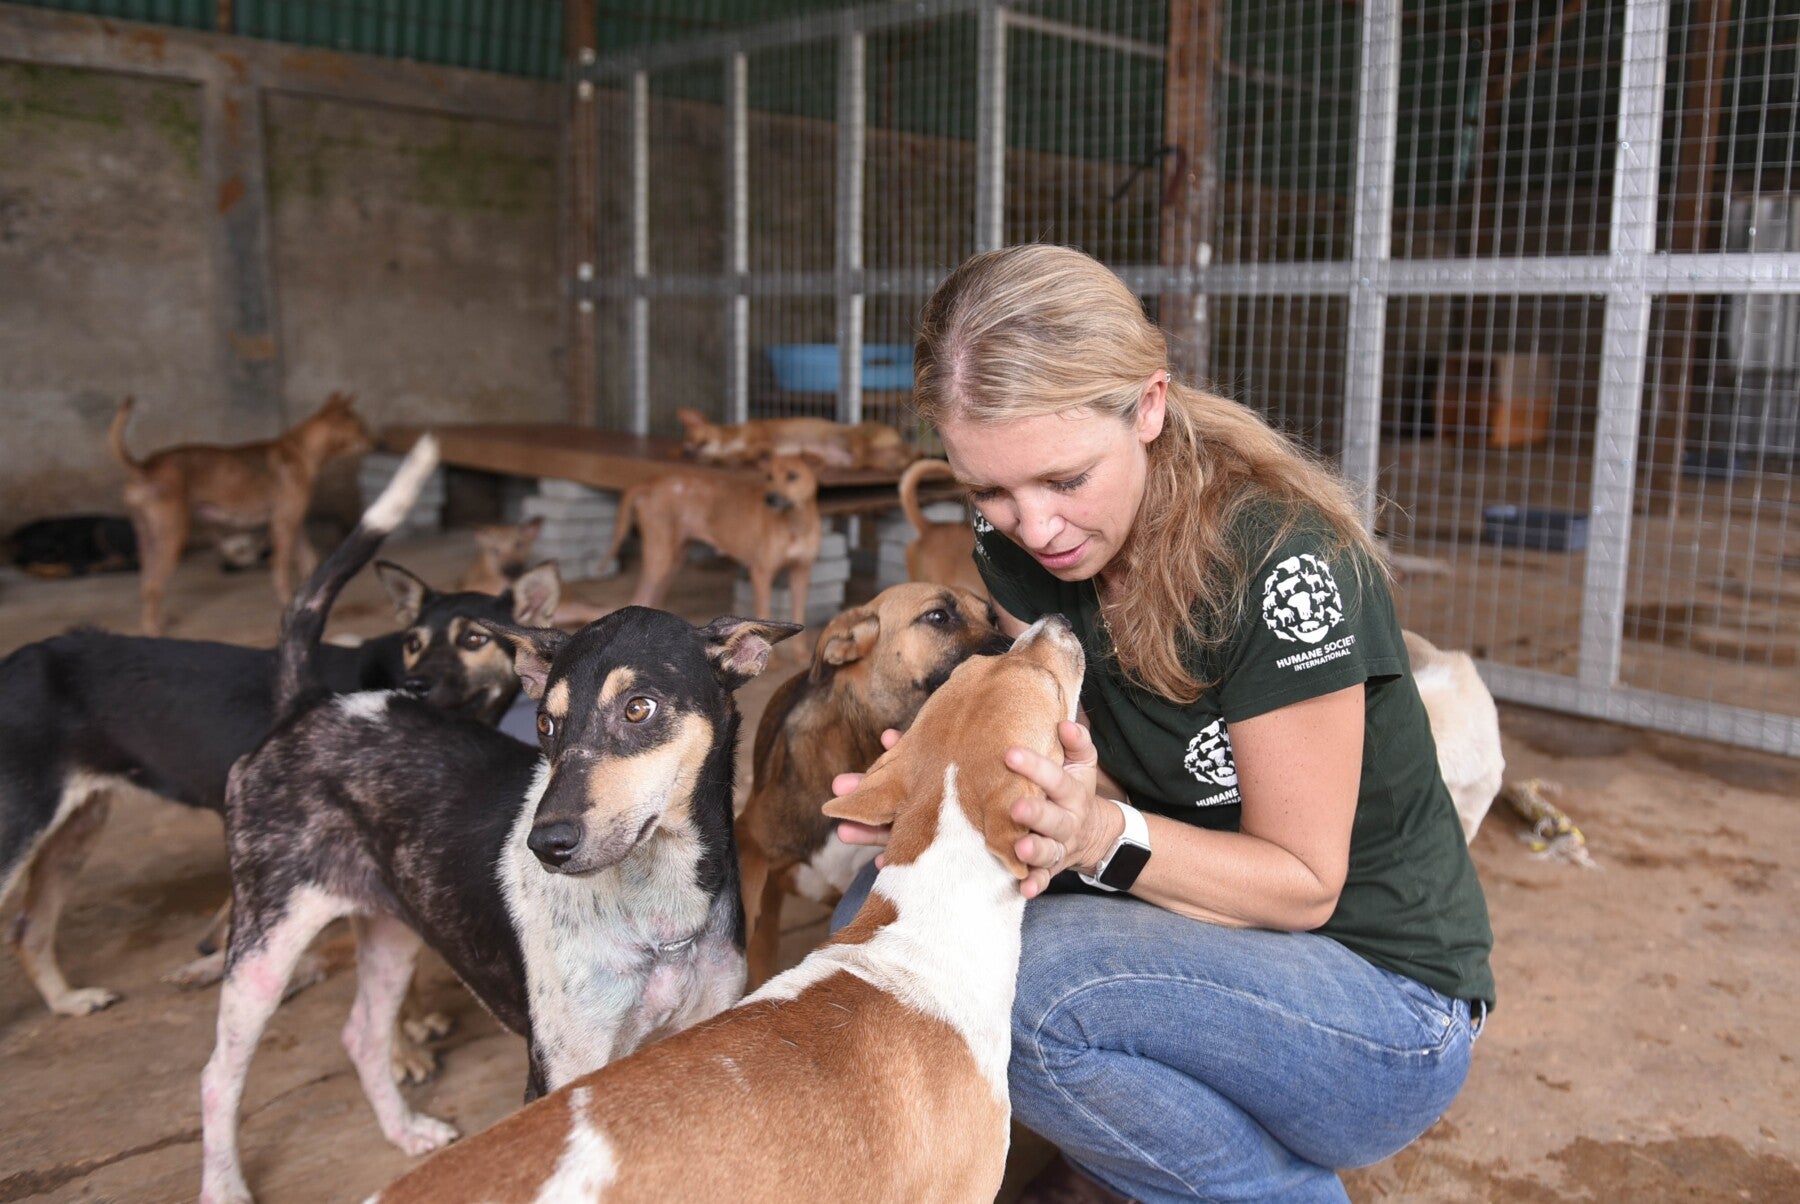 Rescued dogs at a temporary shelter in Indonesia